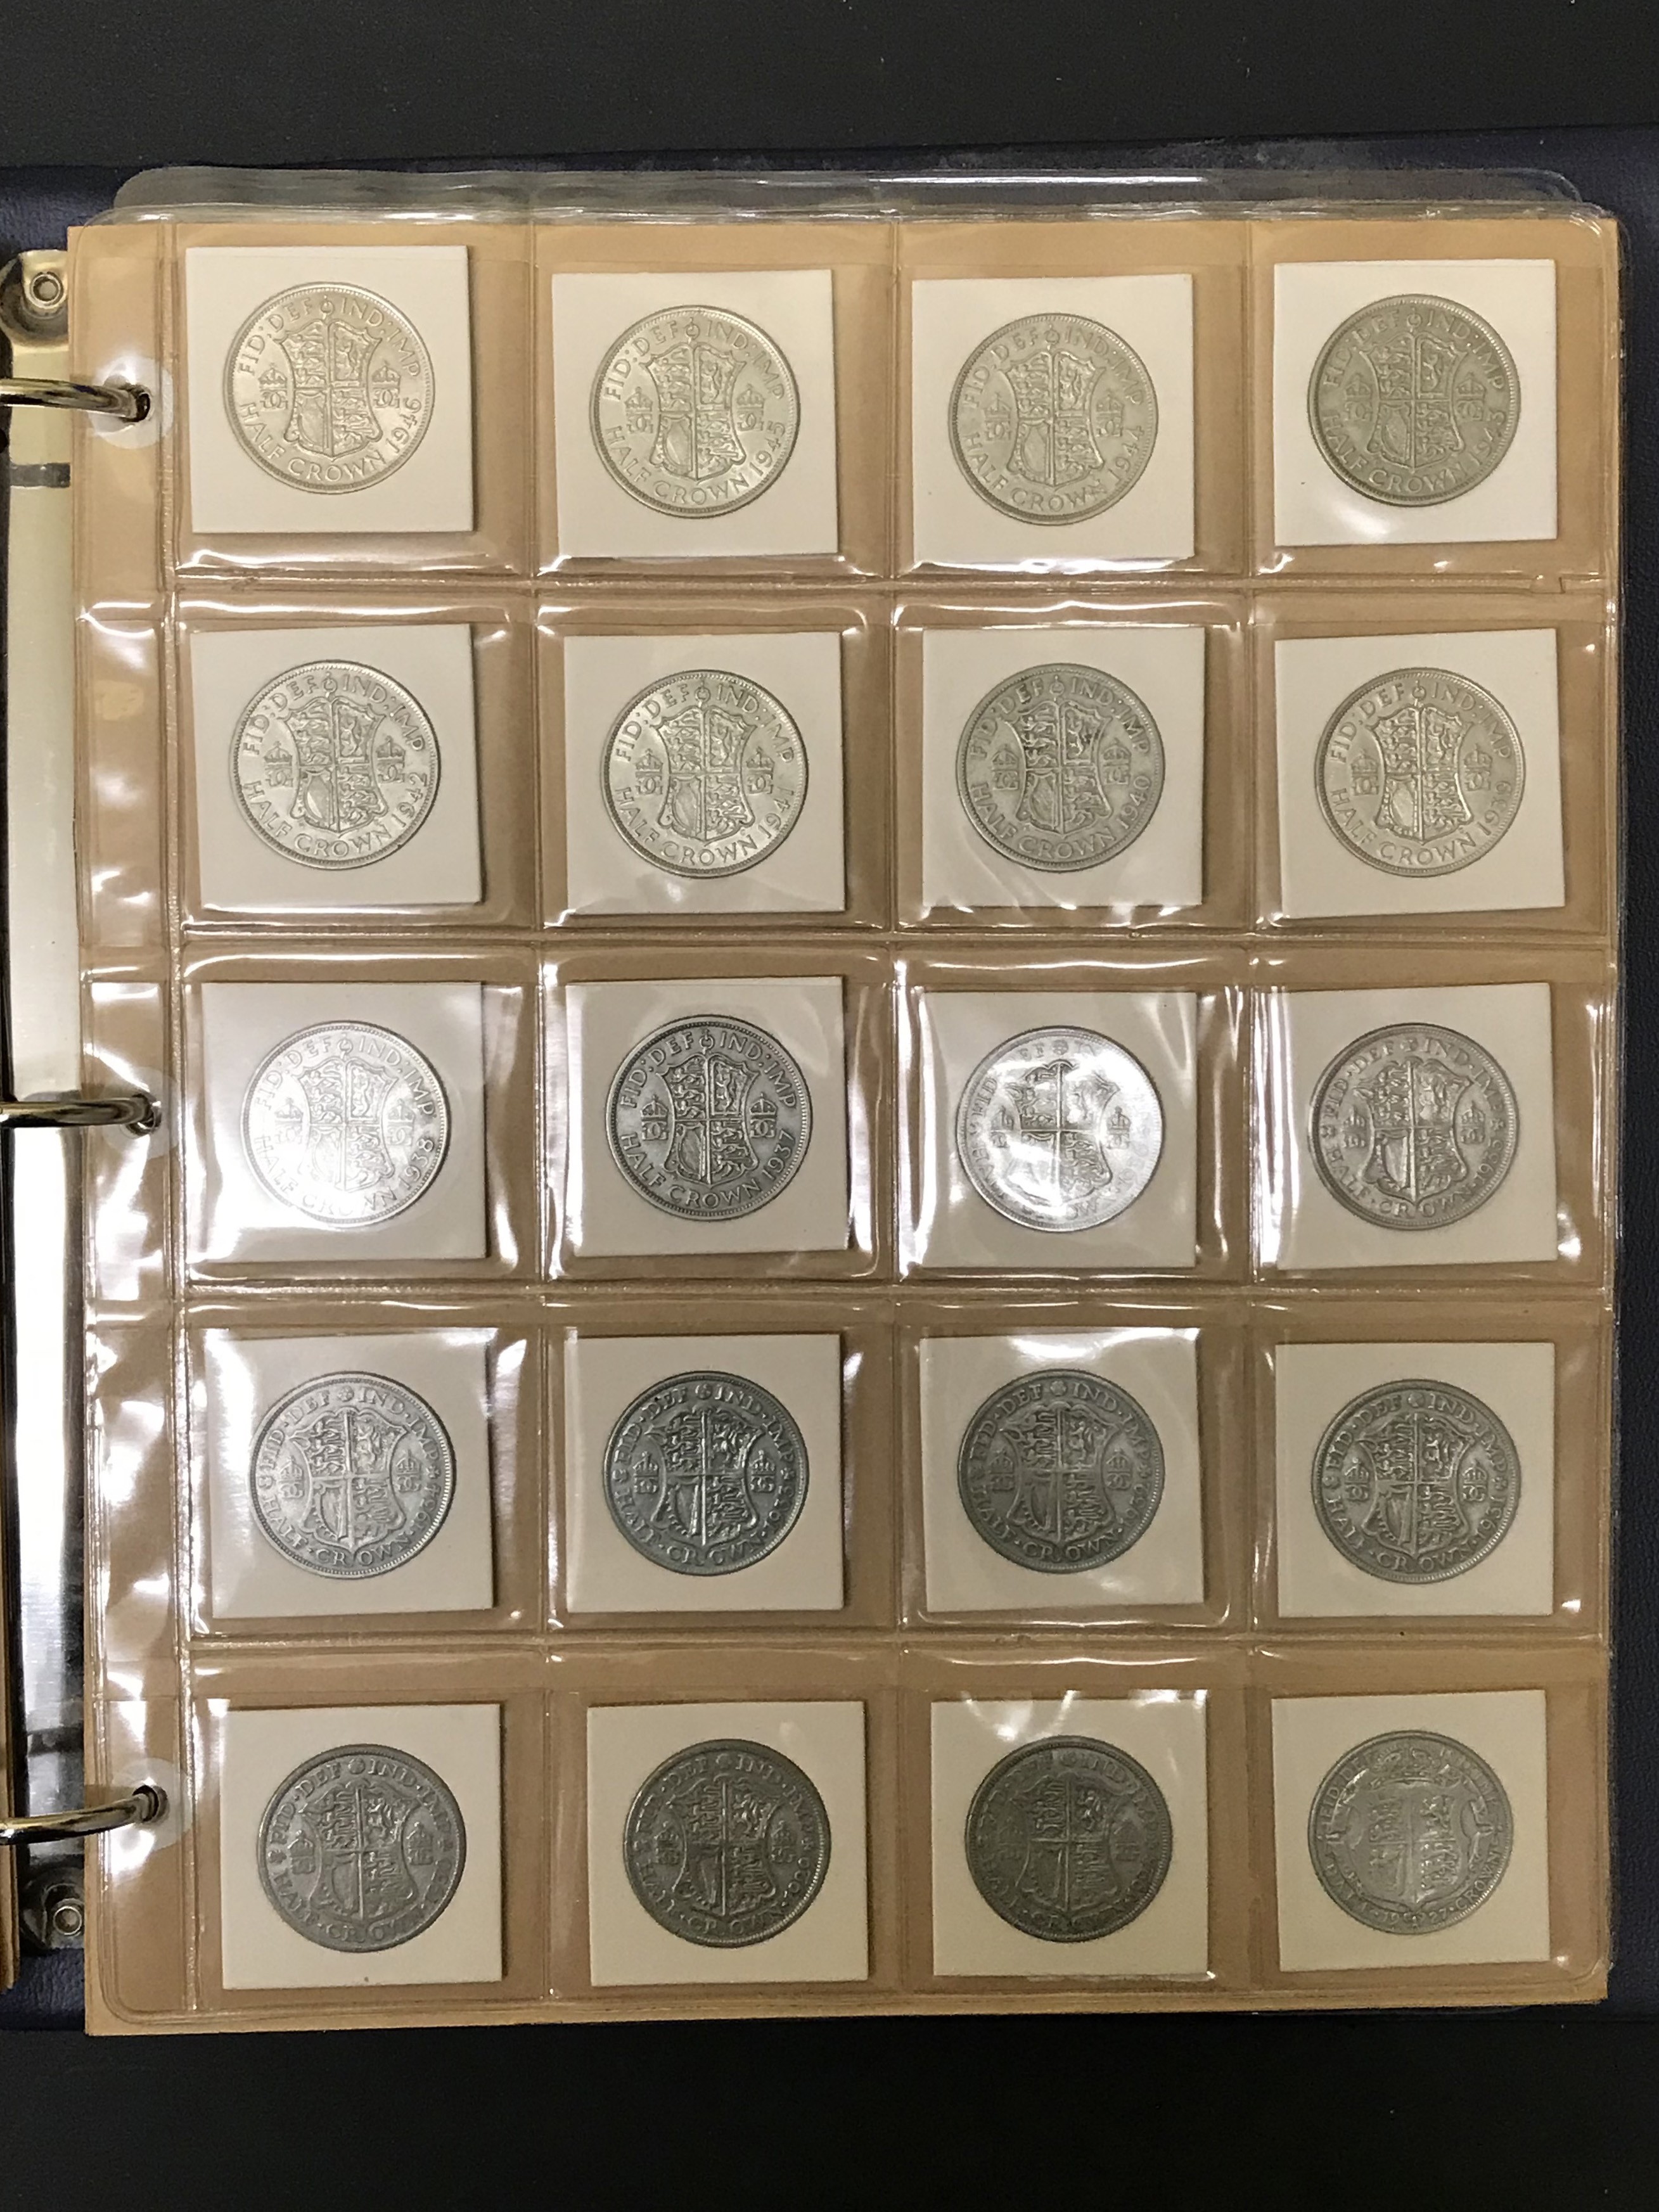 5 albums of coins including silver - Image 32 of 44